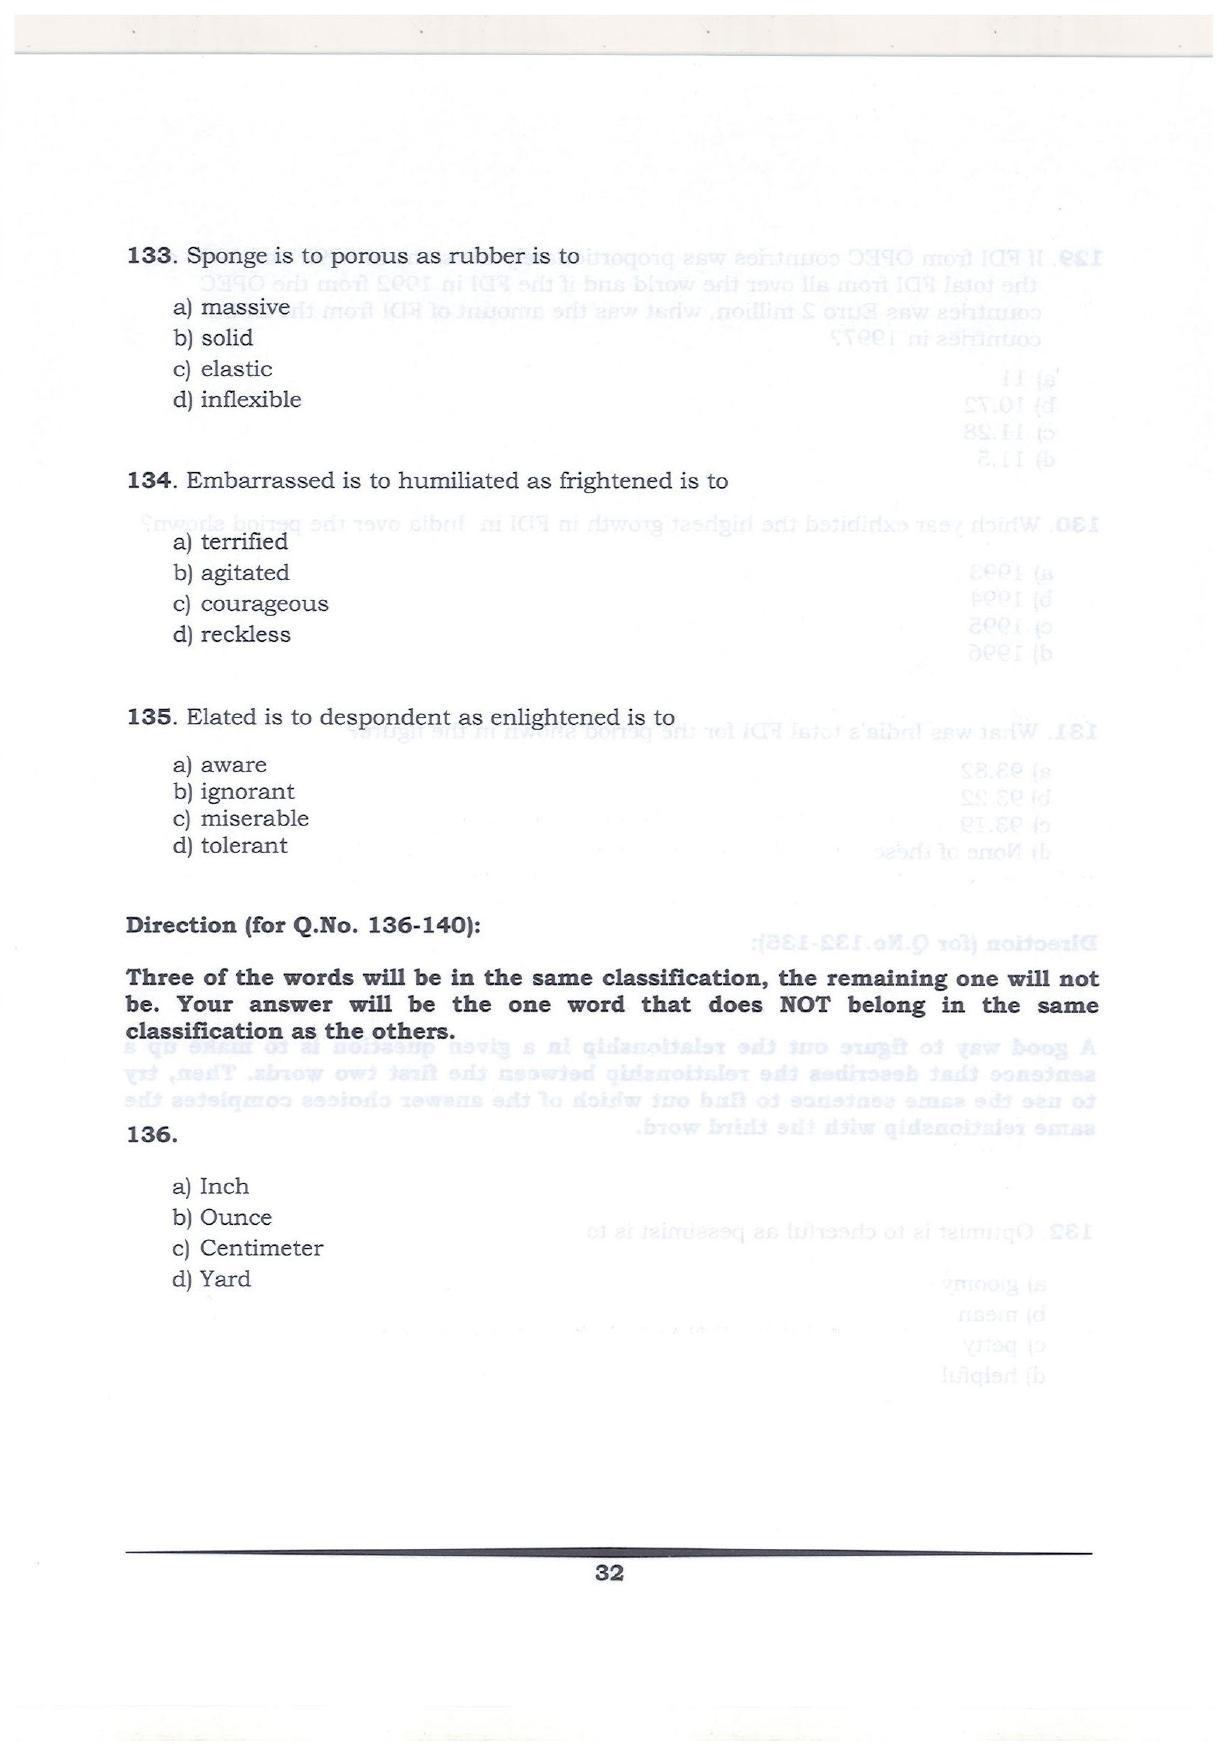 KMAT Question Papers - February 2018 - Page 31